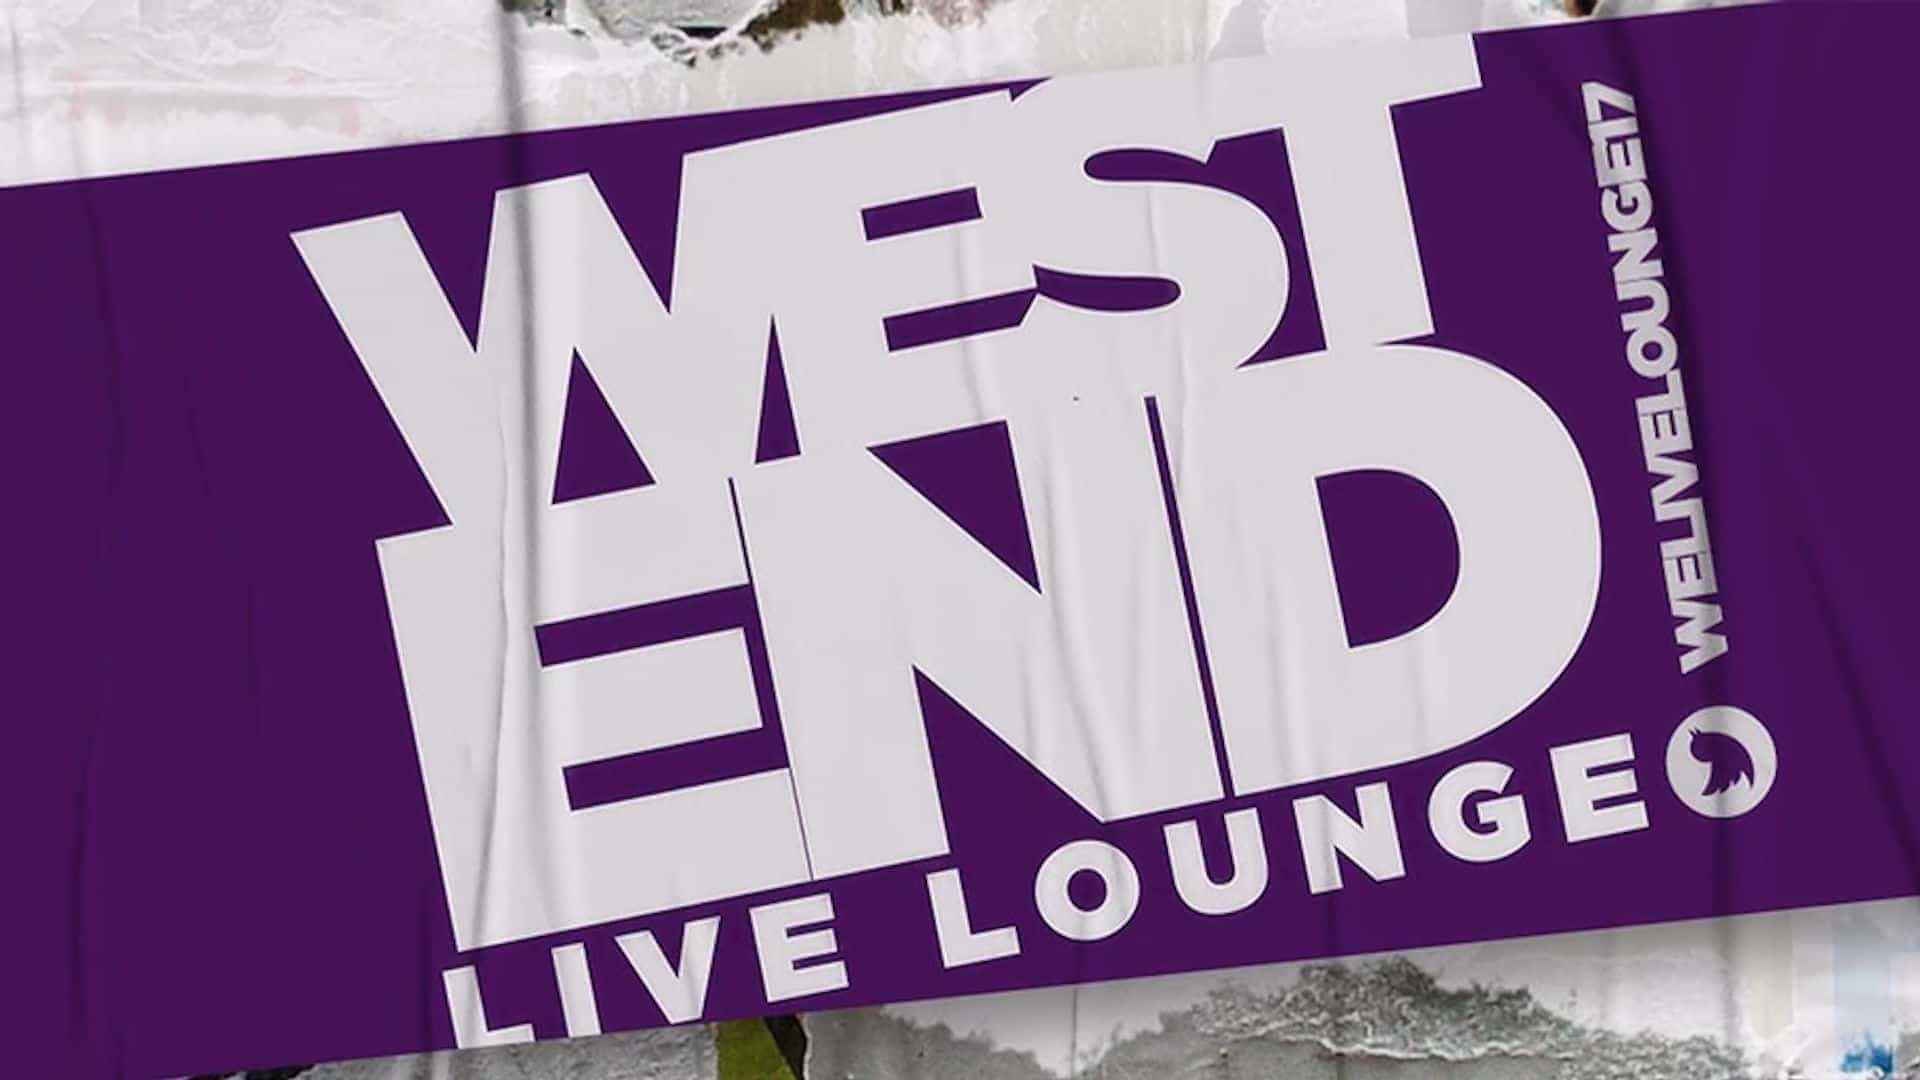 West End Live Lounge - The Greats